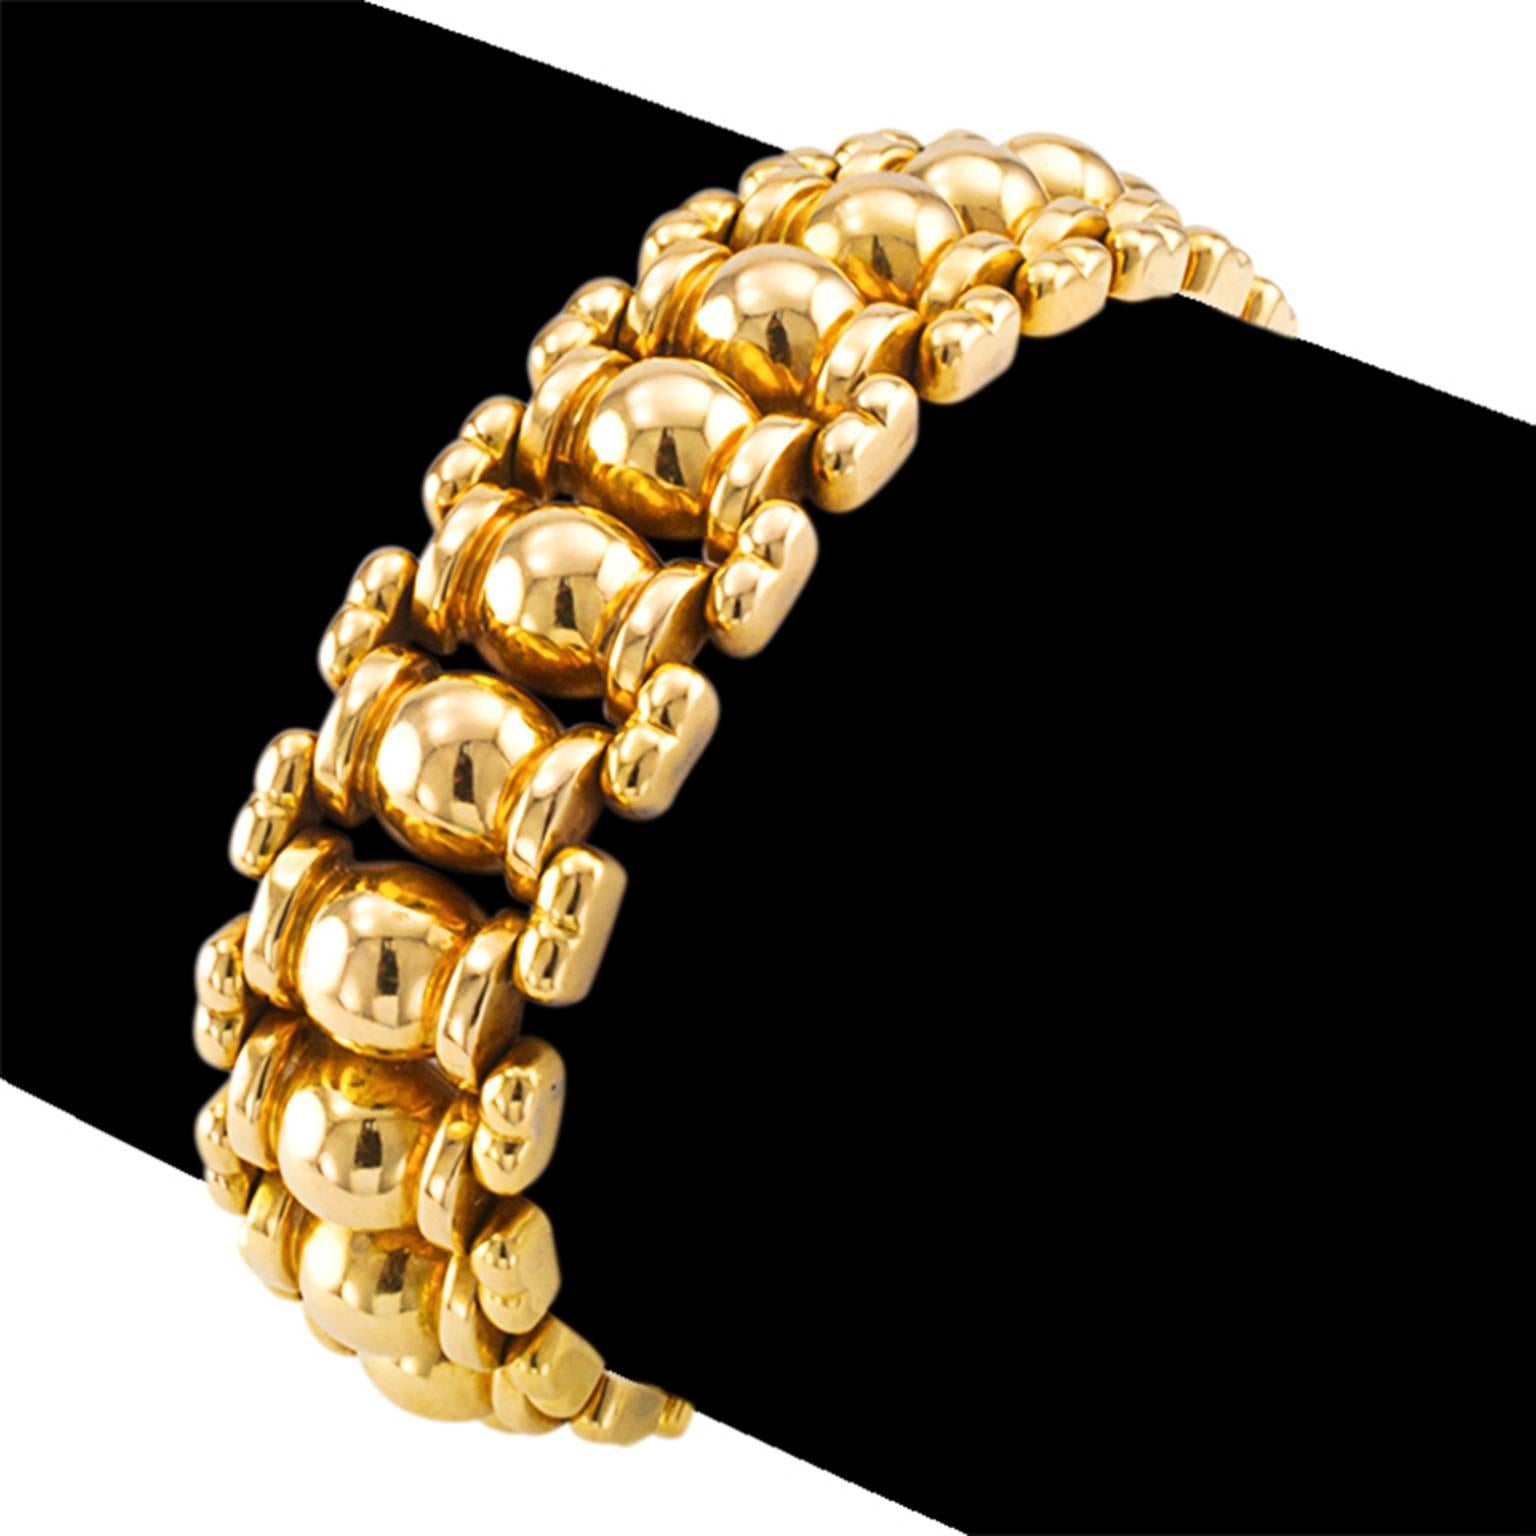 Retro 18Kt Gold Bracelet

Attractive and very wearable, an array of convex geometric shapes arranged with just the right amount of space in between them to allow light to play hide and seek, shining back at  the world in that fascinating way that